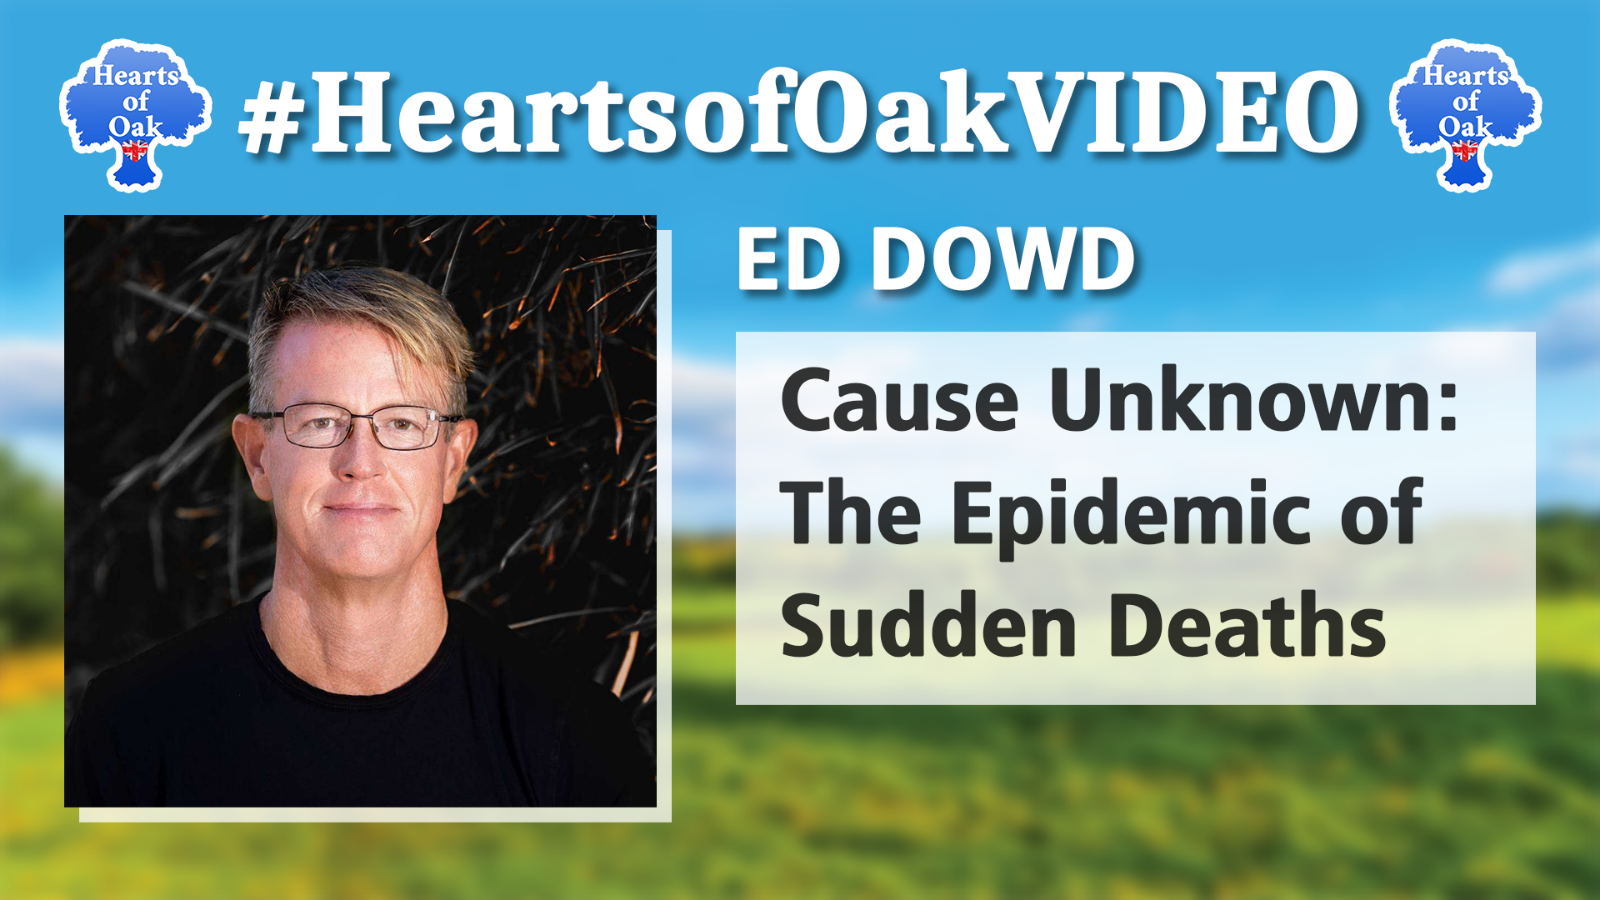 Edward Dowd - Cause Unknown: The Epidemic of Sudden Deaths